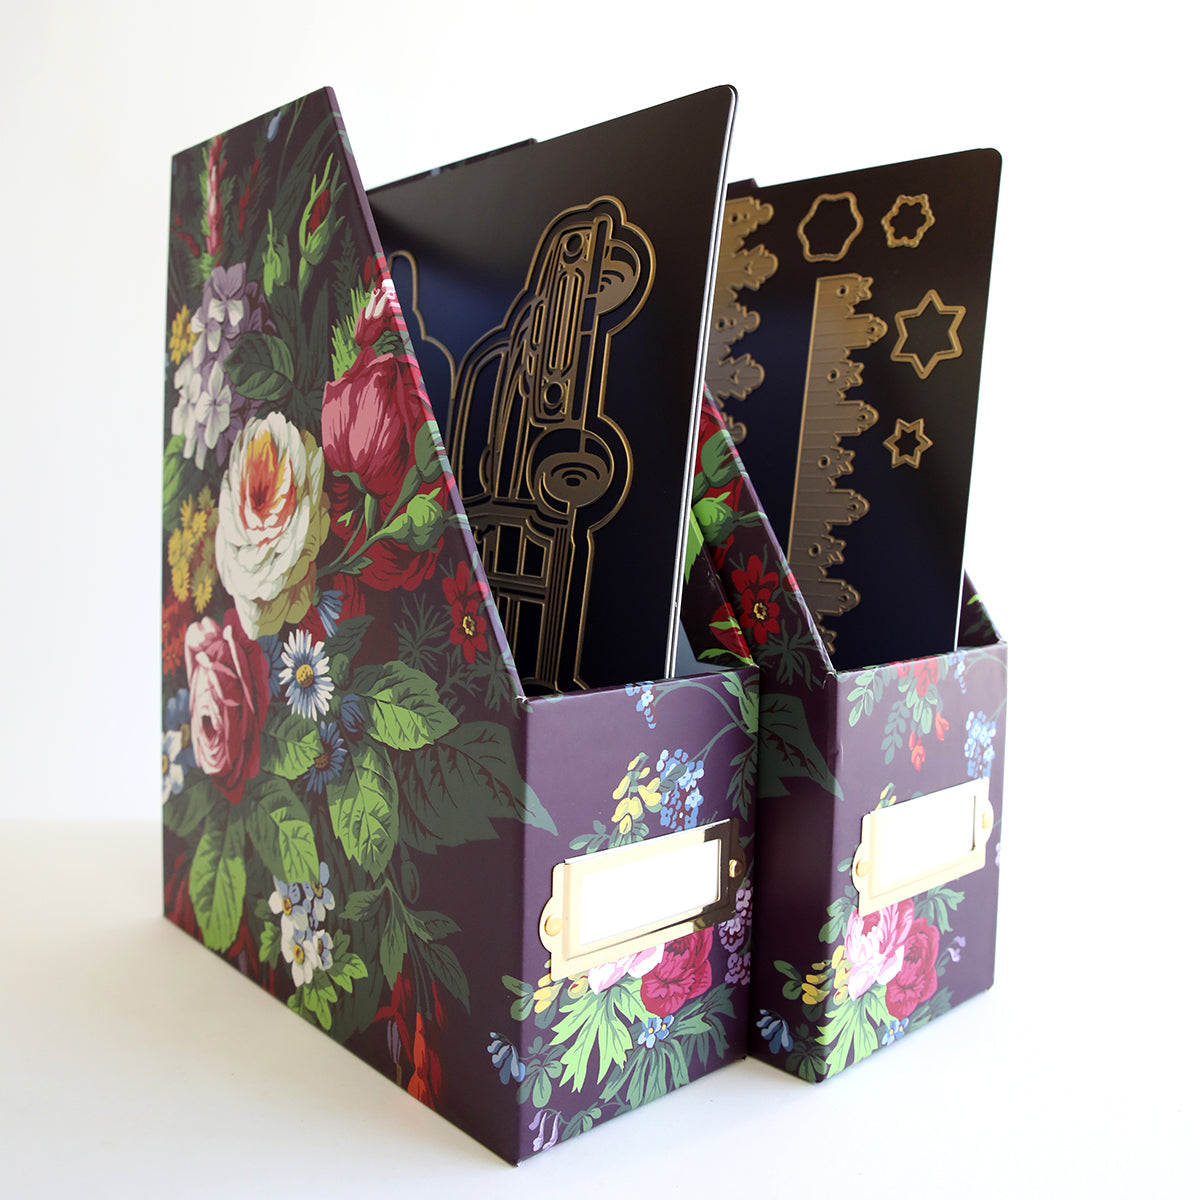 A Set of 2 Die Storage Boxes - Astrid featuring the Aubergine Floral Pattern.